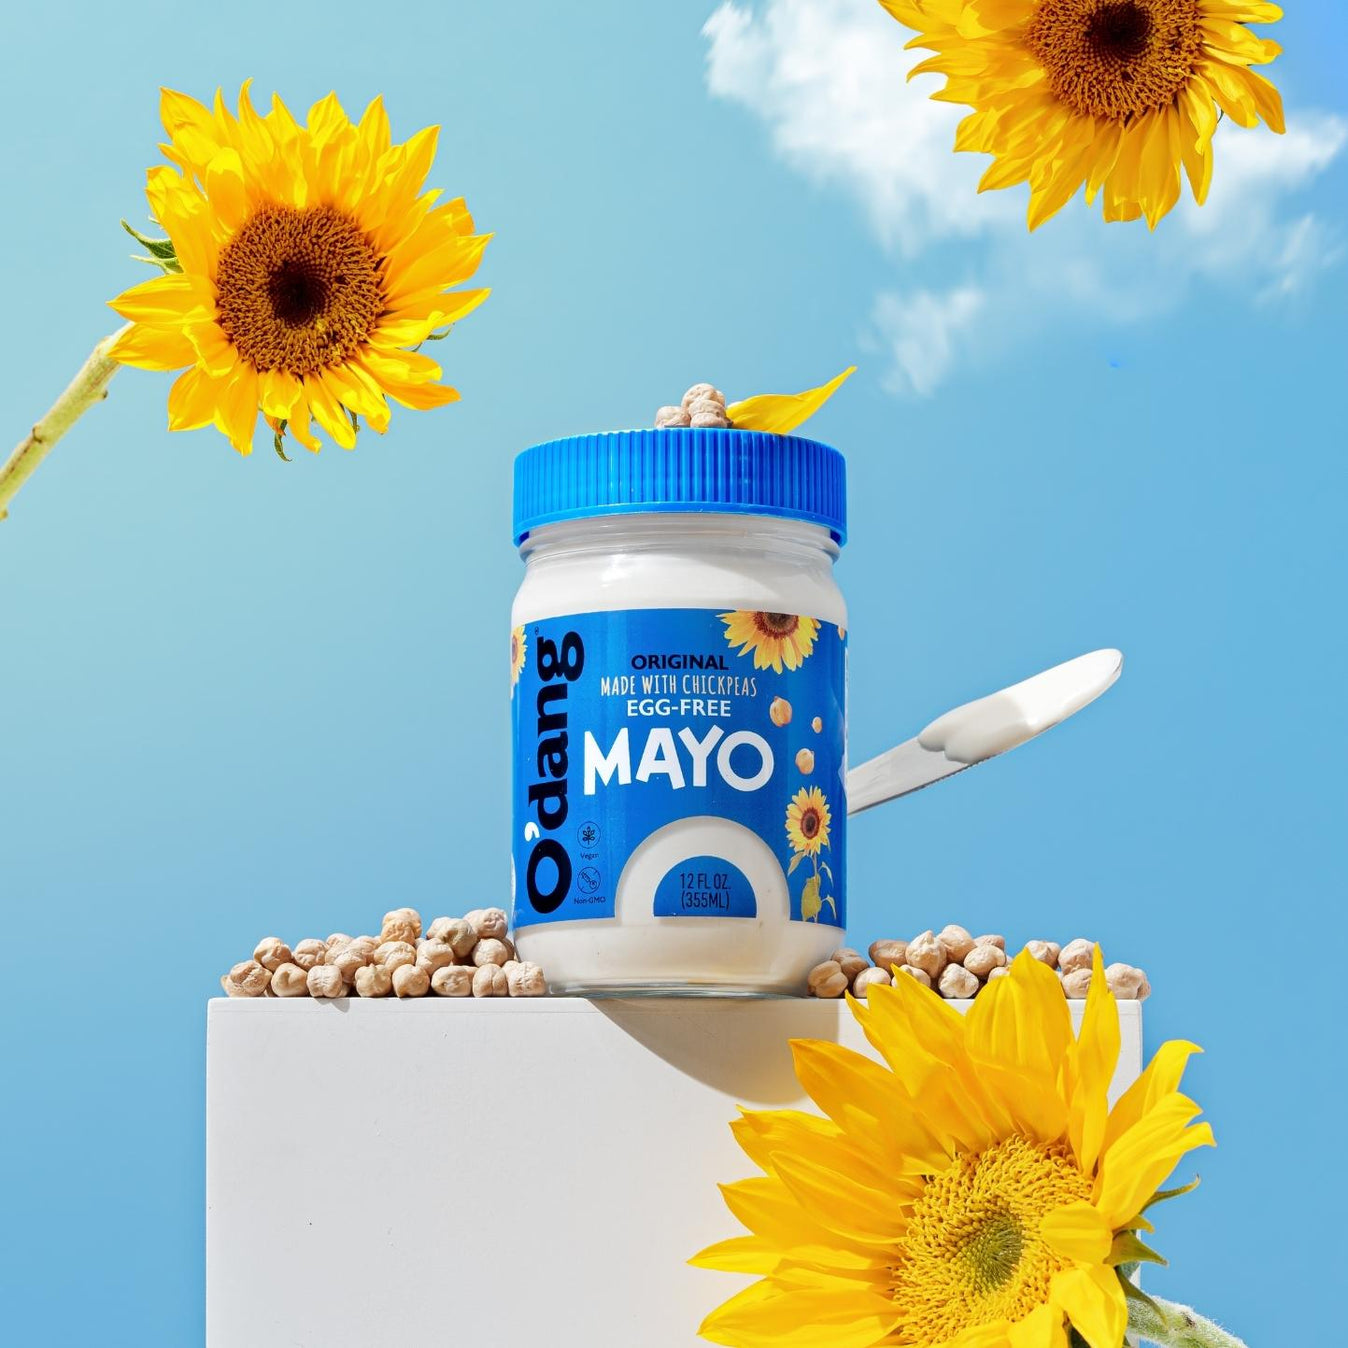 Sunflowers and chickpeas with O'dang Foods brand plant-based original vegan mayo/